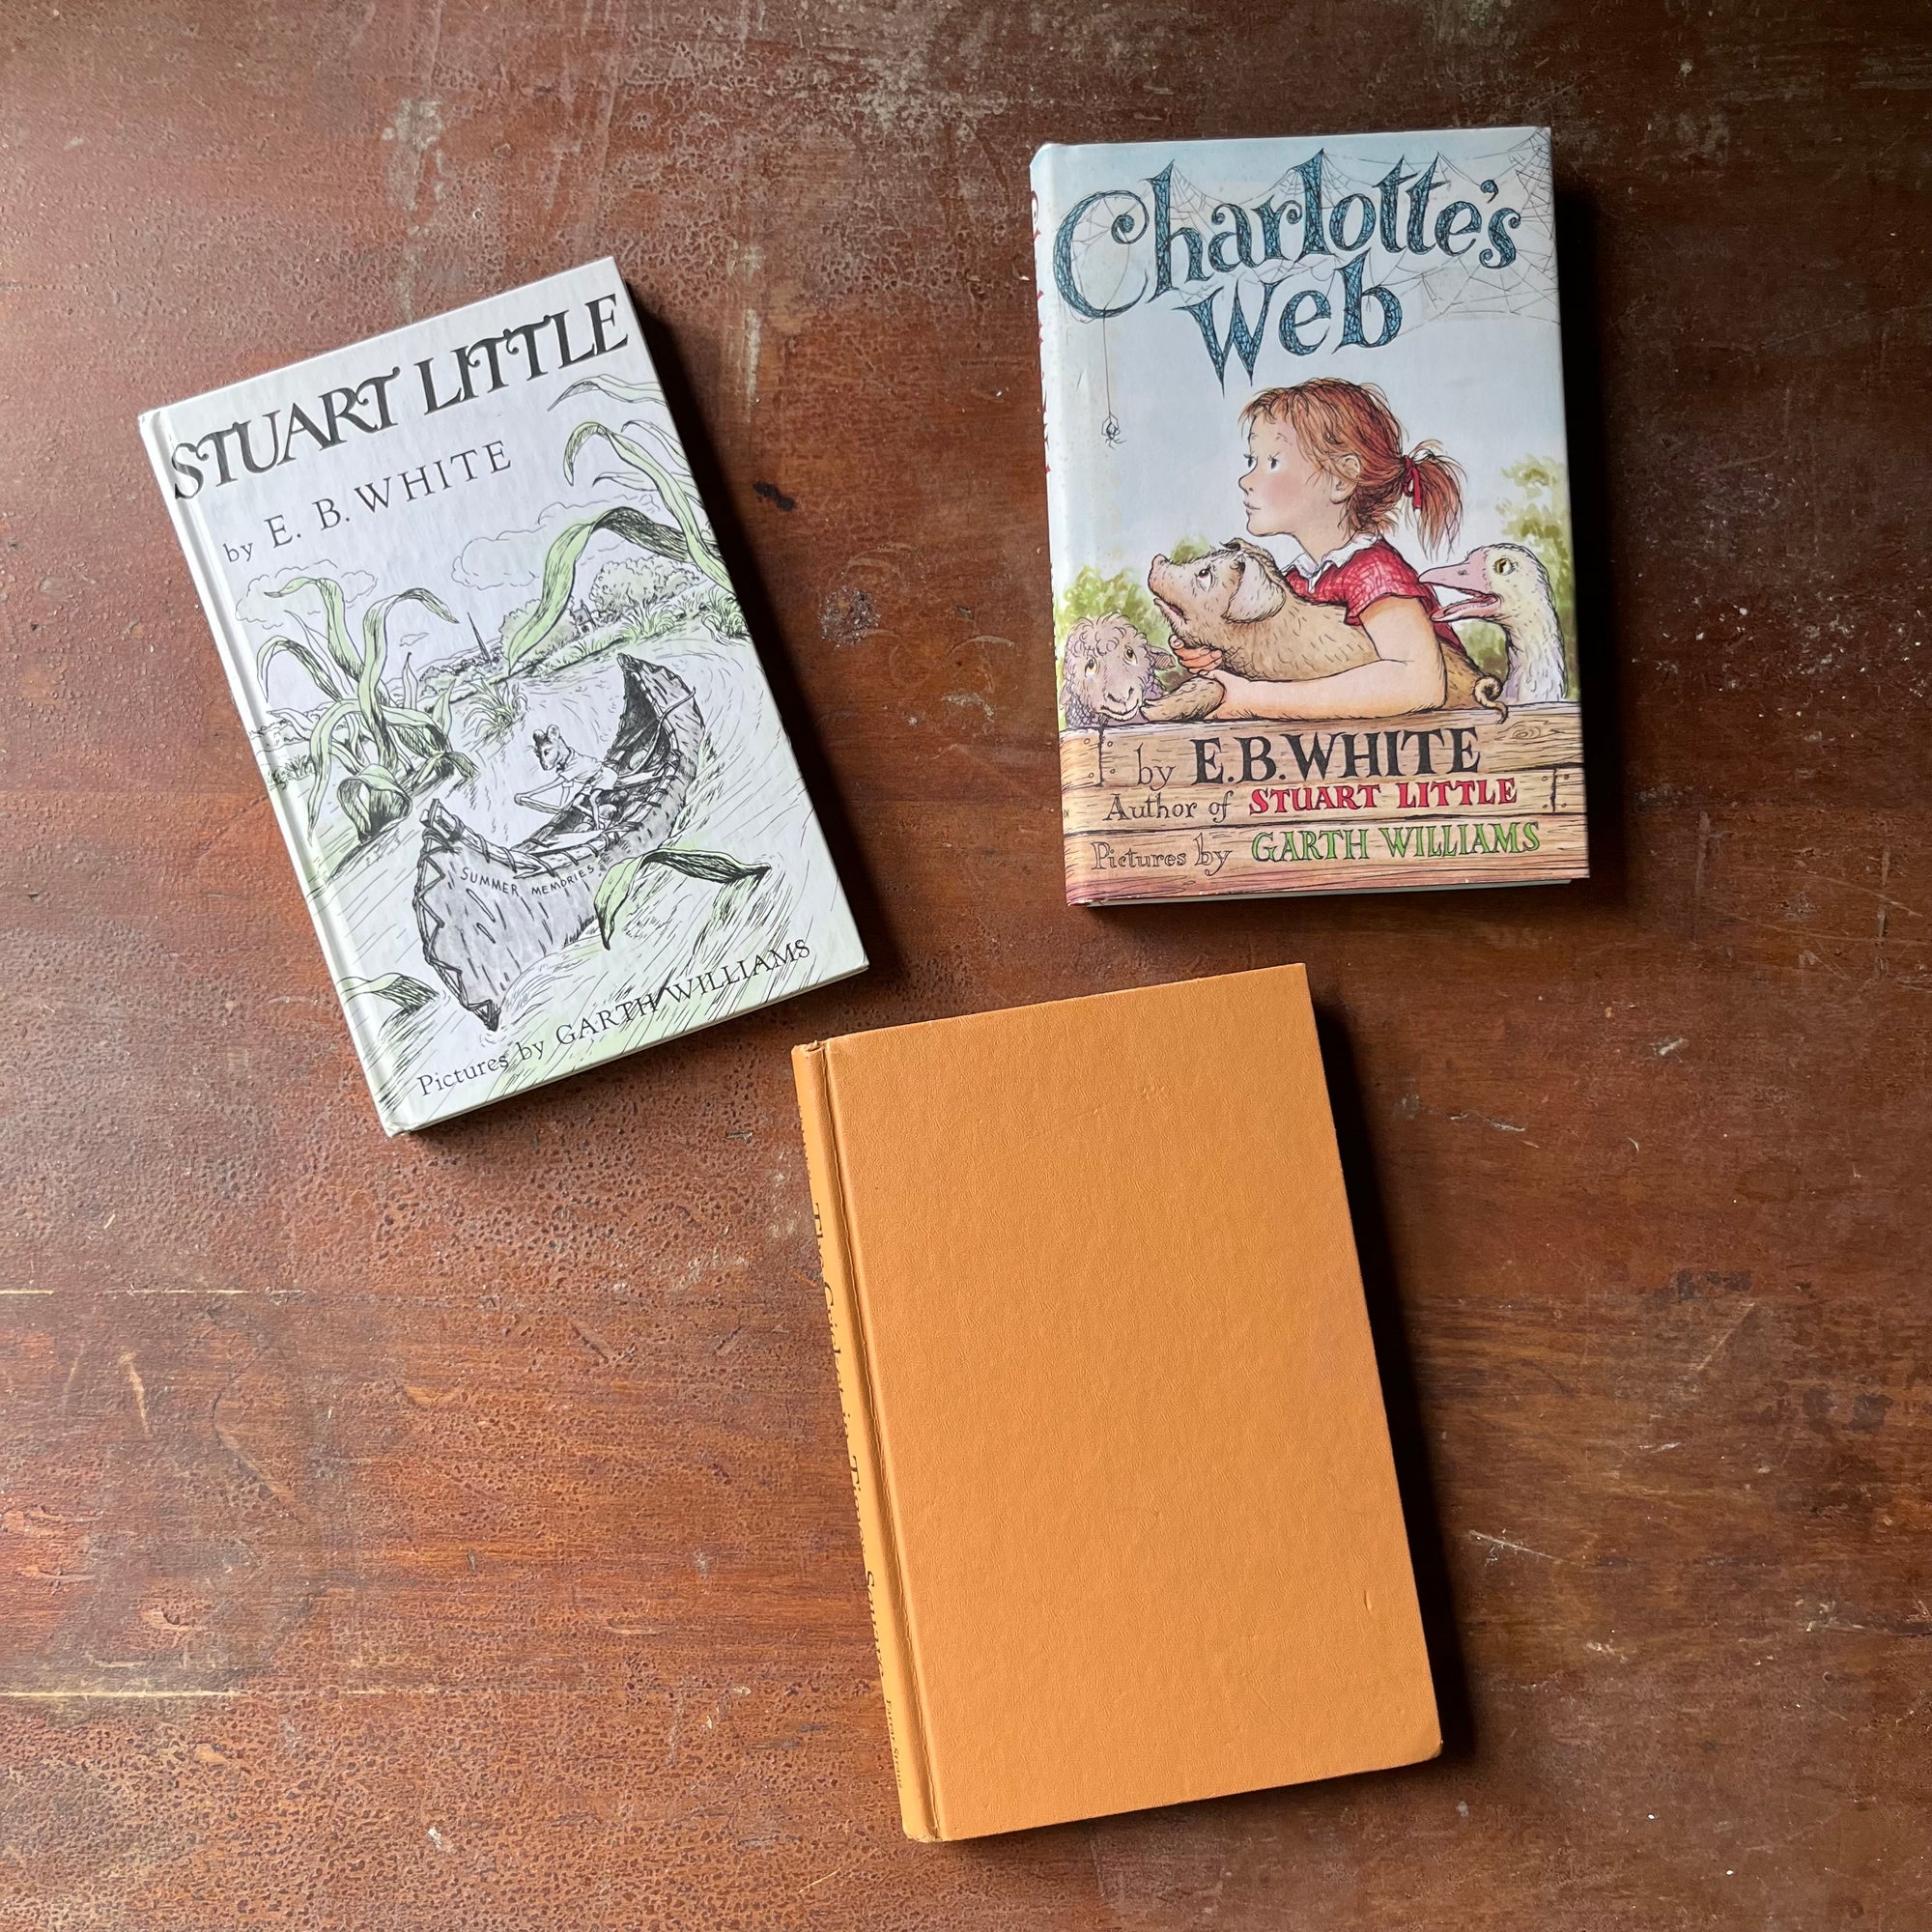 vintage children's chapter books, Garth Williams Illustrations, vintage children's books about animals - Set of Three Books Illustrated by Garth Williams-Charlotte's Web, Stuart Little & The Cricket in Times Square - view 0f the front covers